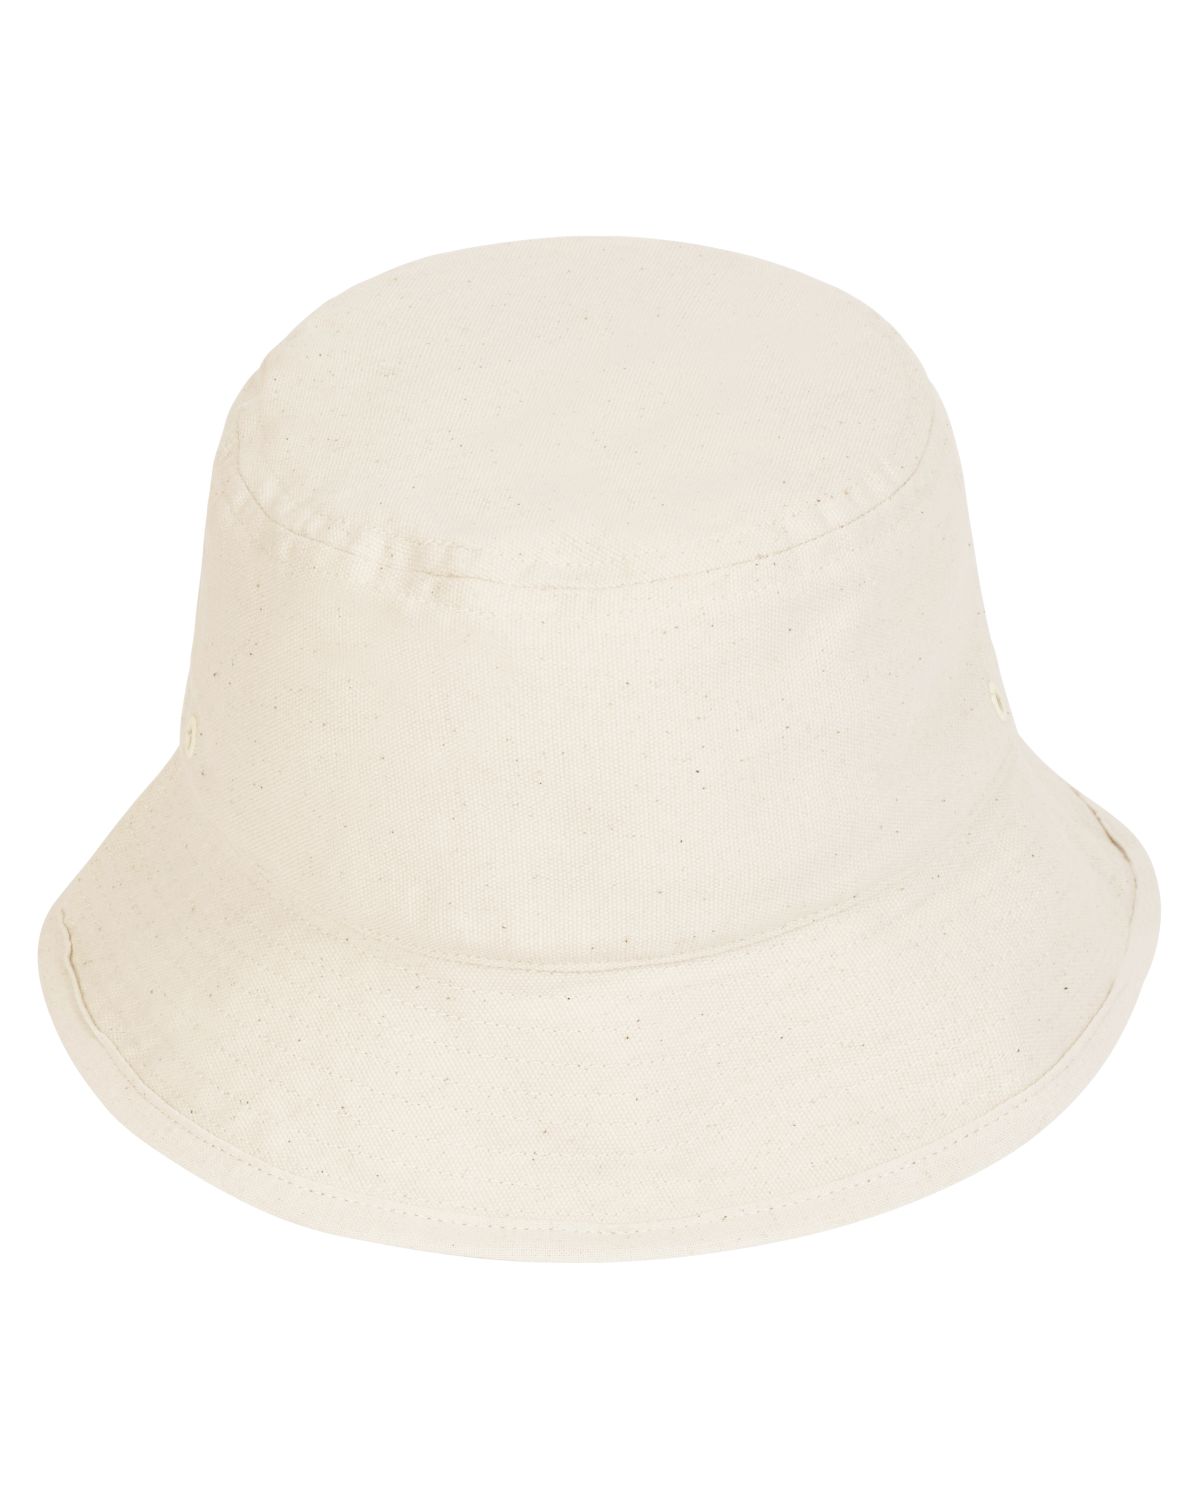 customize your own sustainable bucket hat made of 80% recycled organic cotton